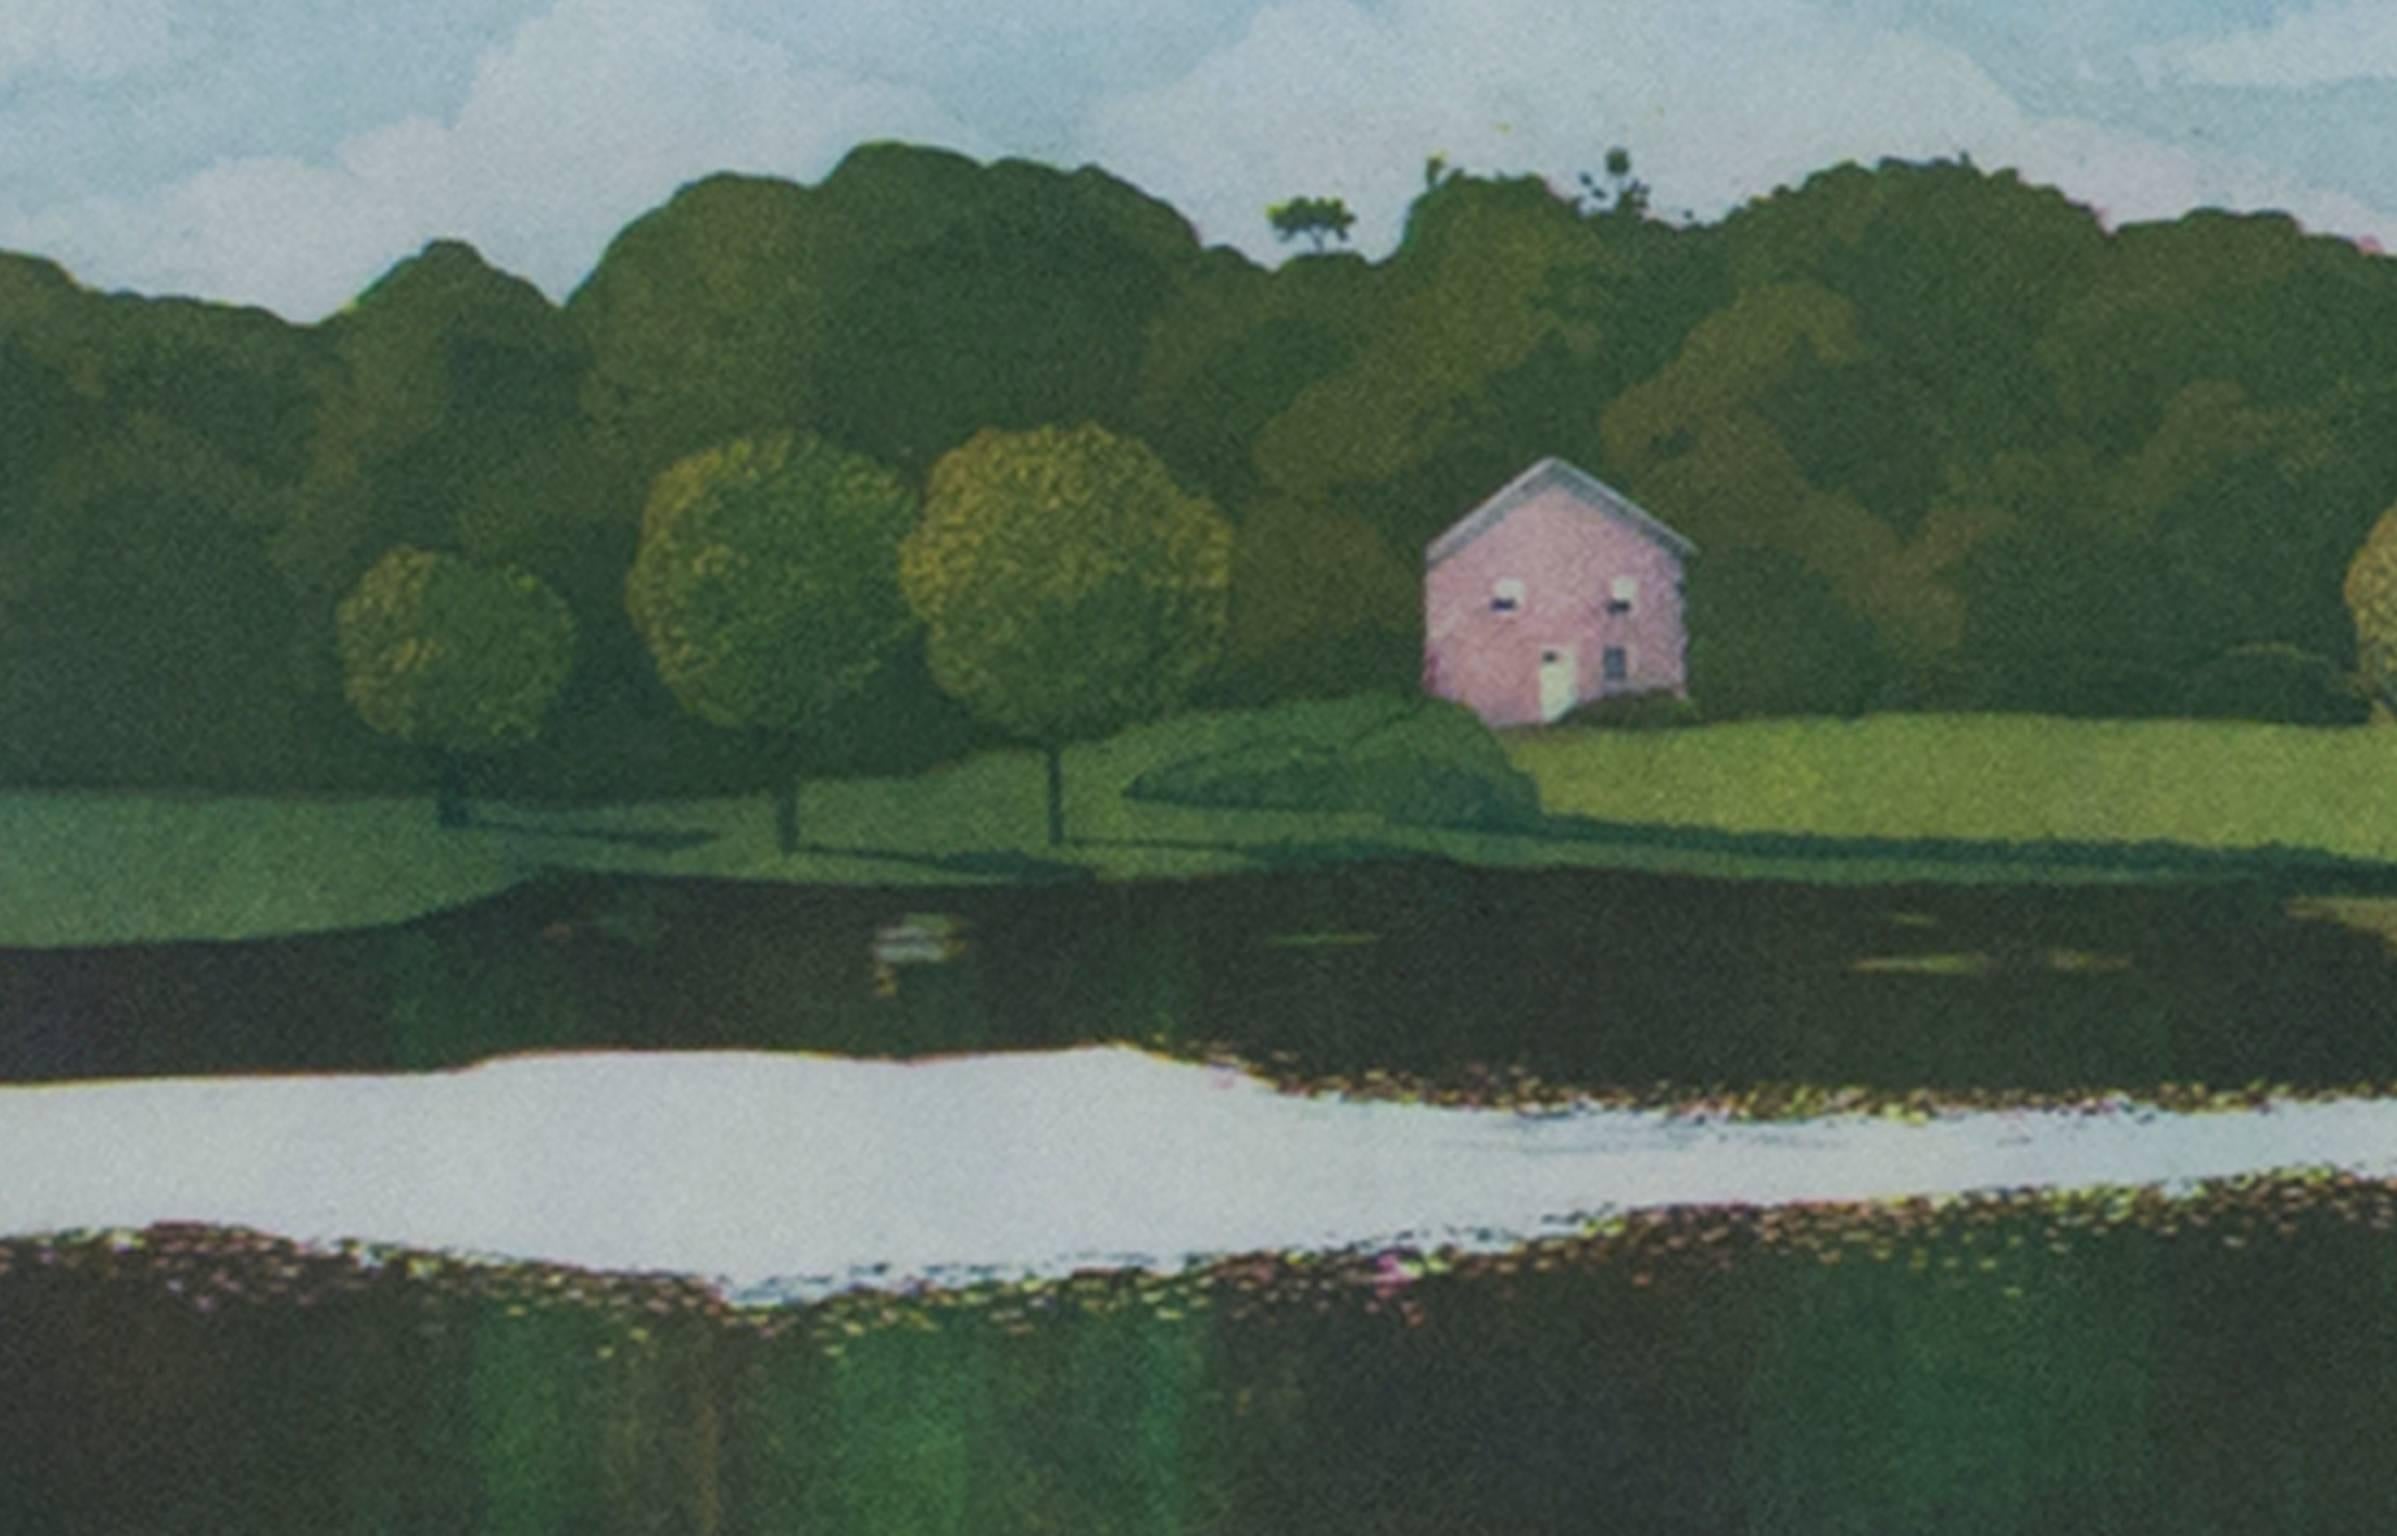 This aquatint, depicting a pink house on a lake, is by an unknown artist, signed 